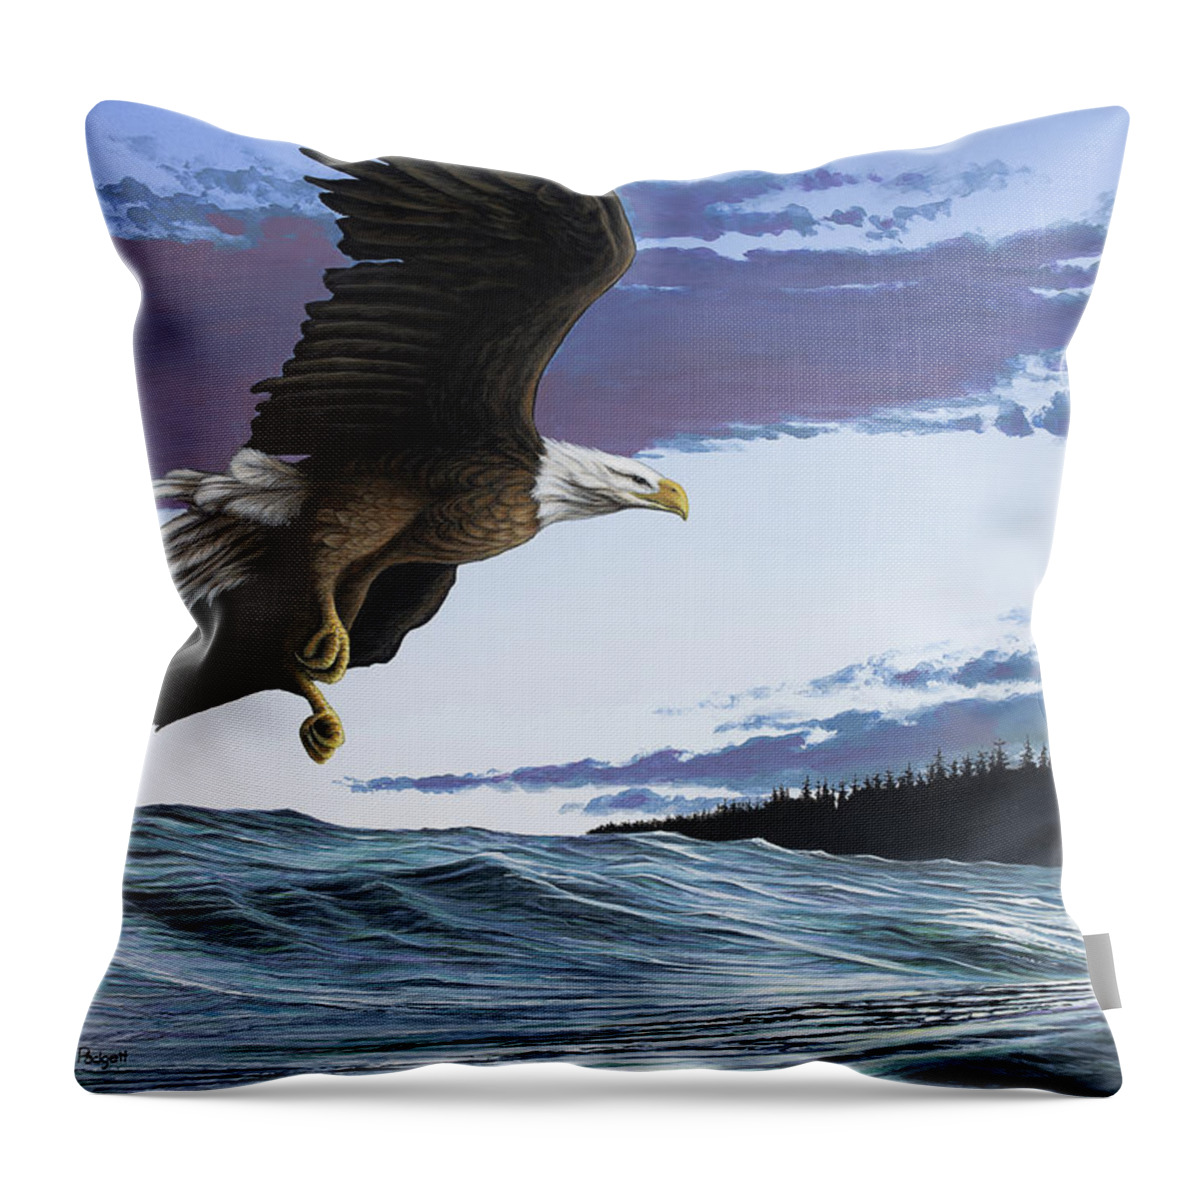 Landscape Throw Pillow featuring the painting Eagle in Flight by Anthony J Padgett